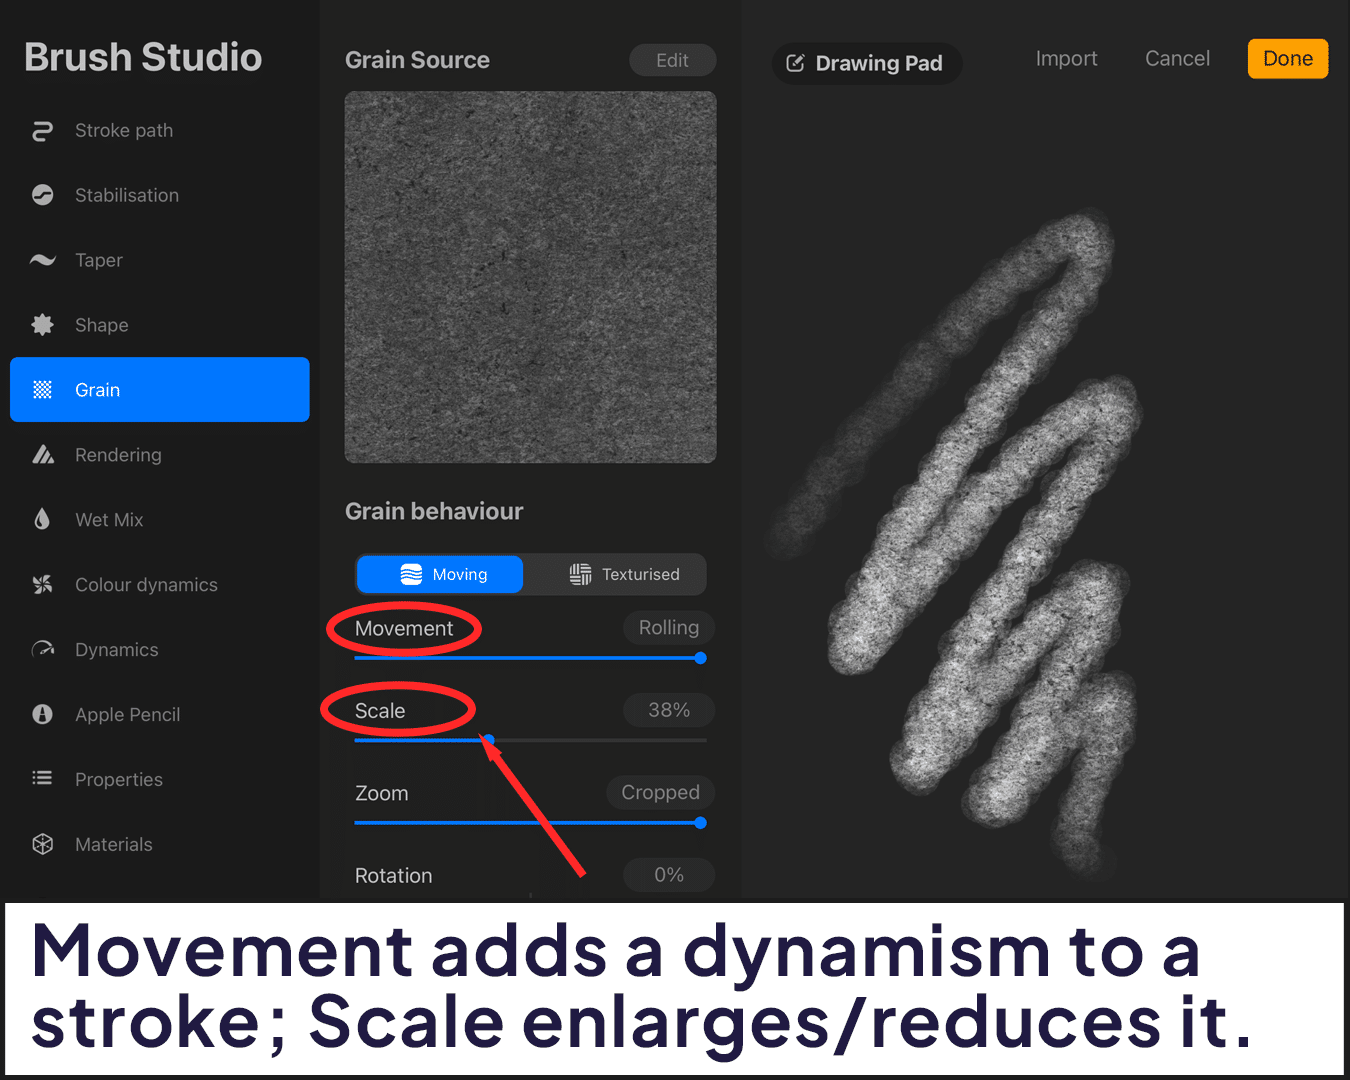 Movement and Scale dynamism 